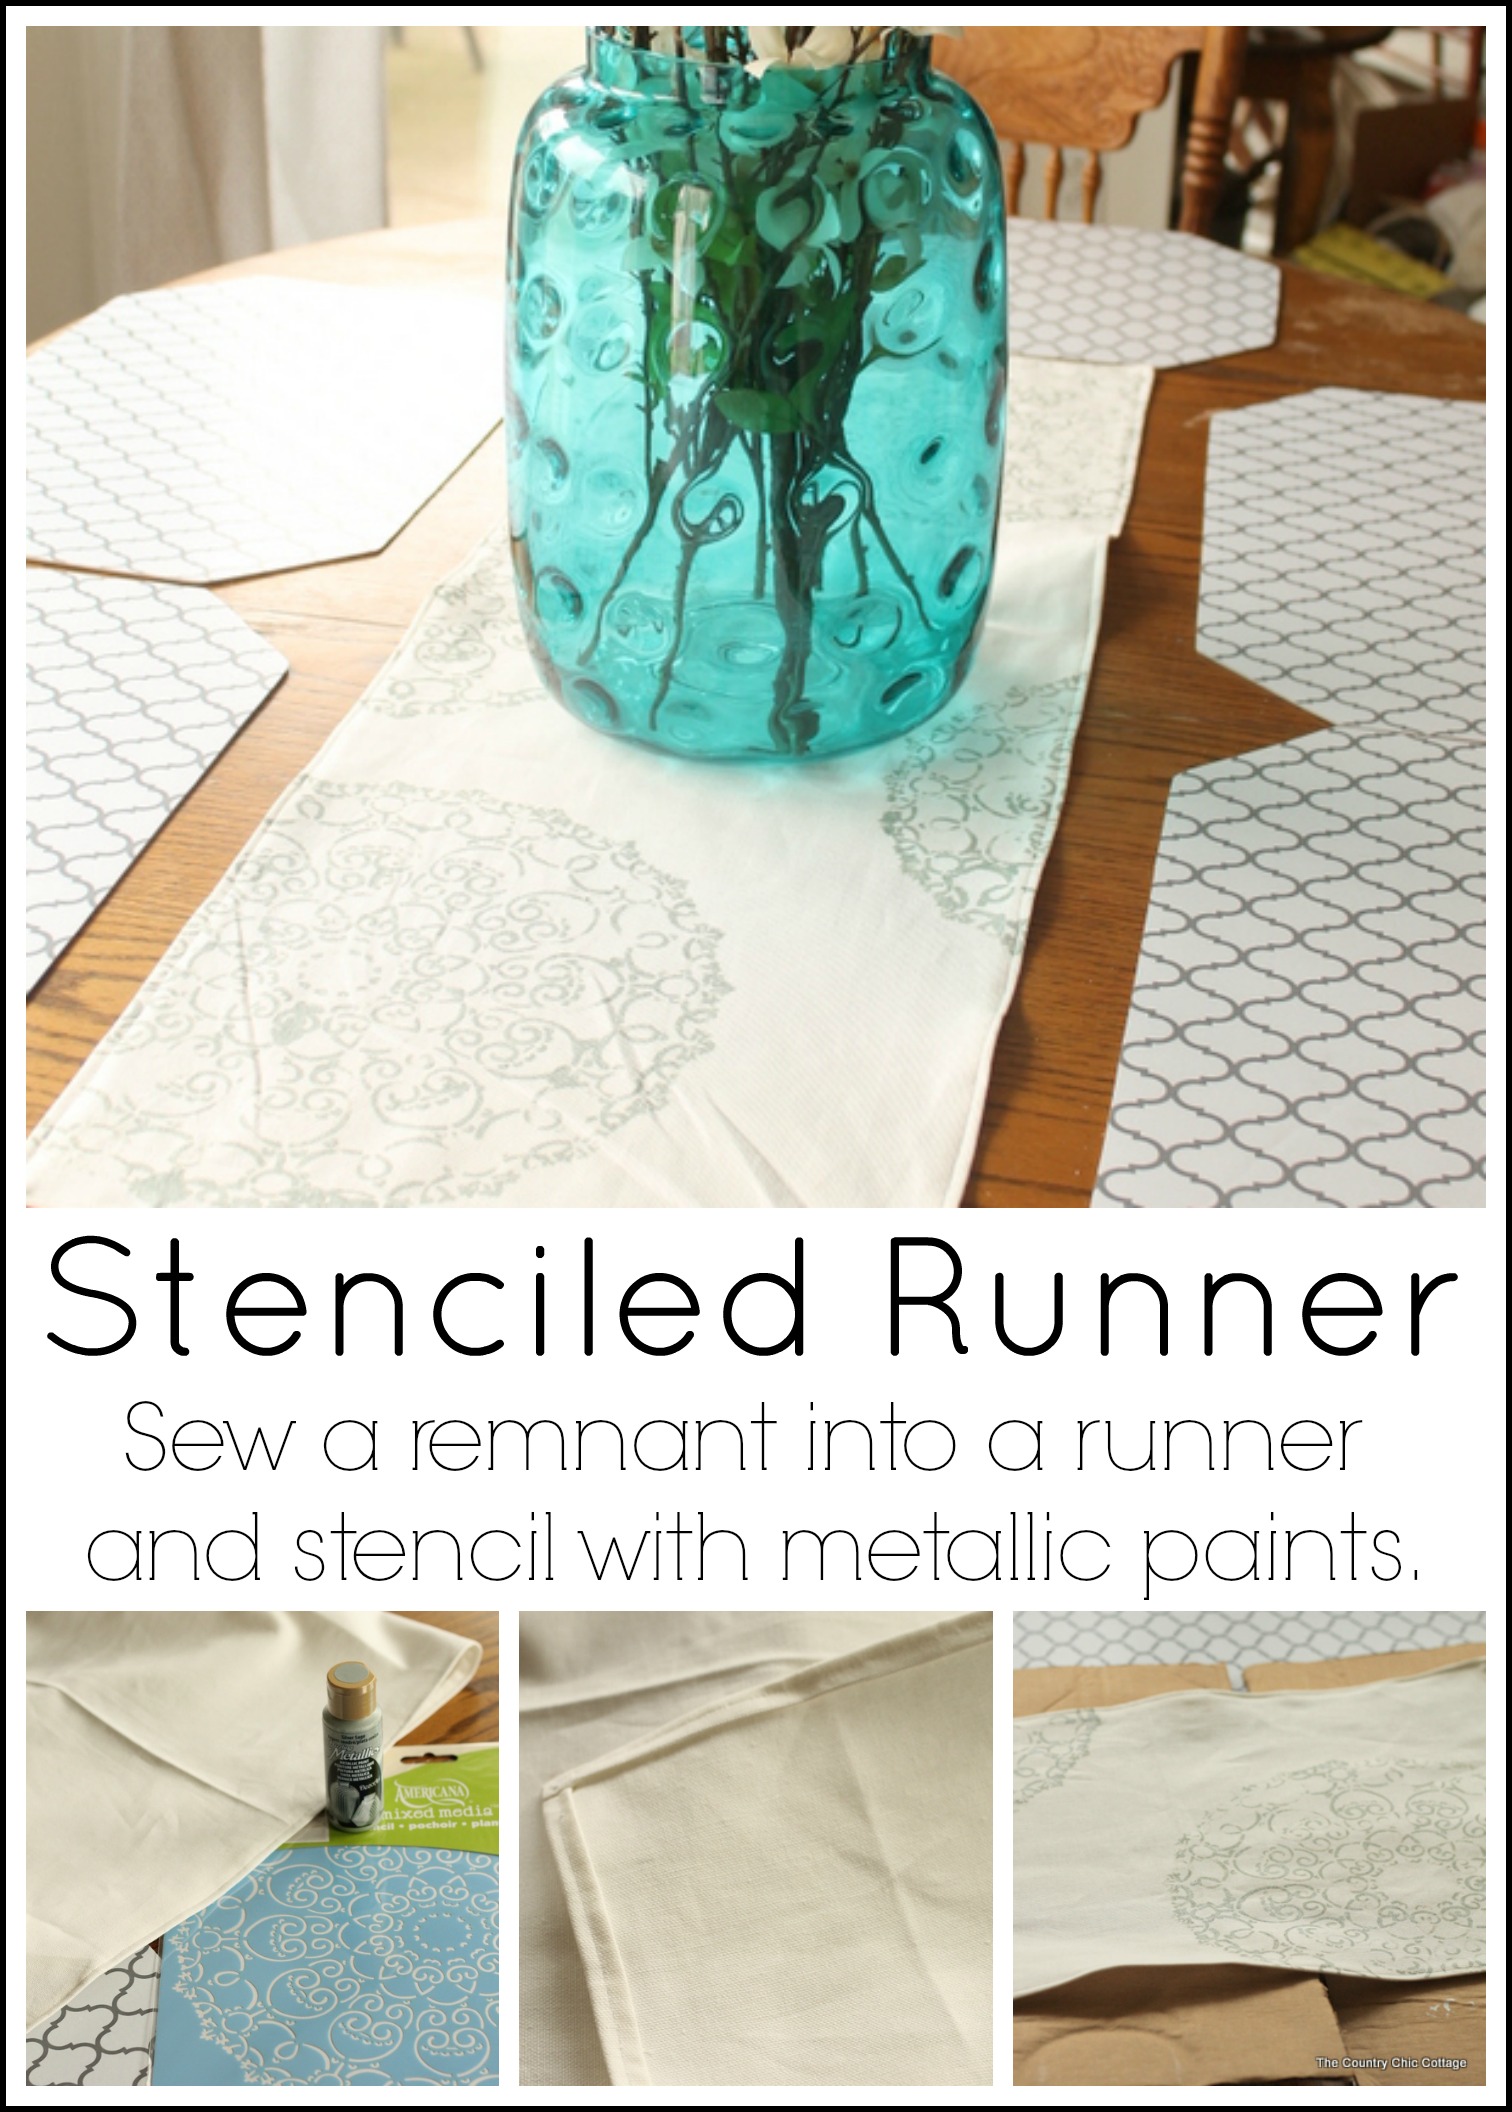 Make a stenciled runner for your table in a few simple steps!